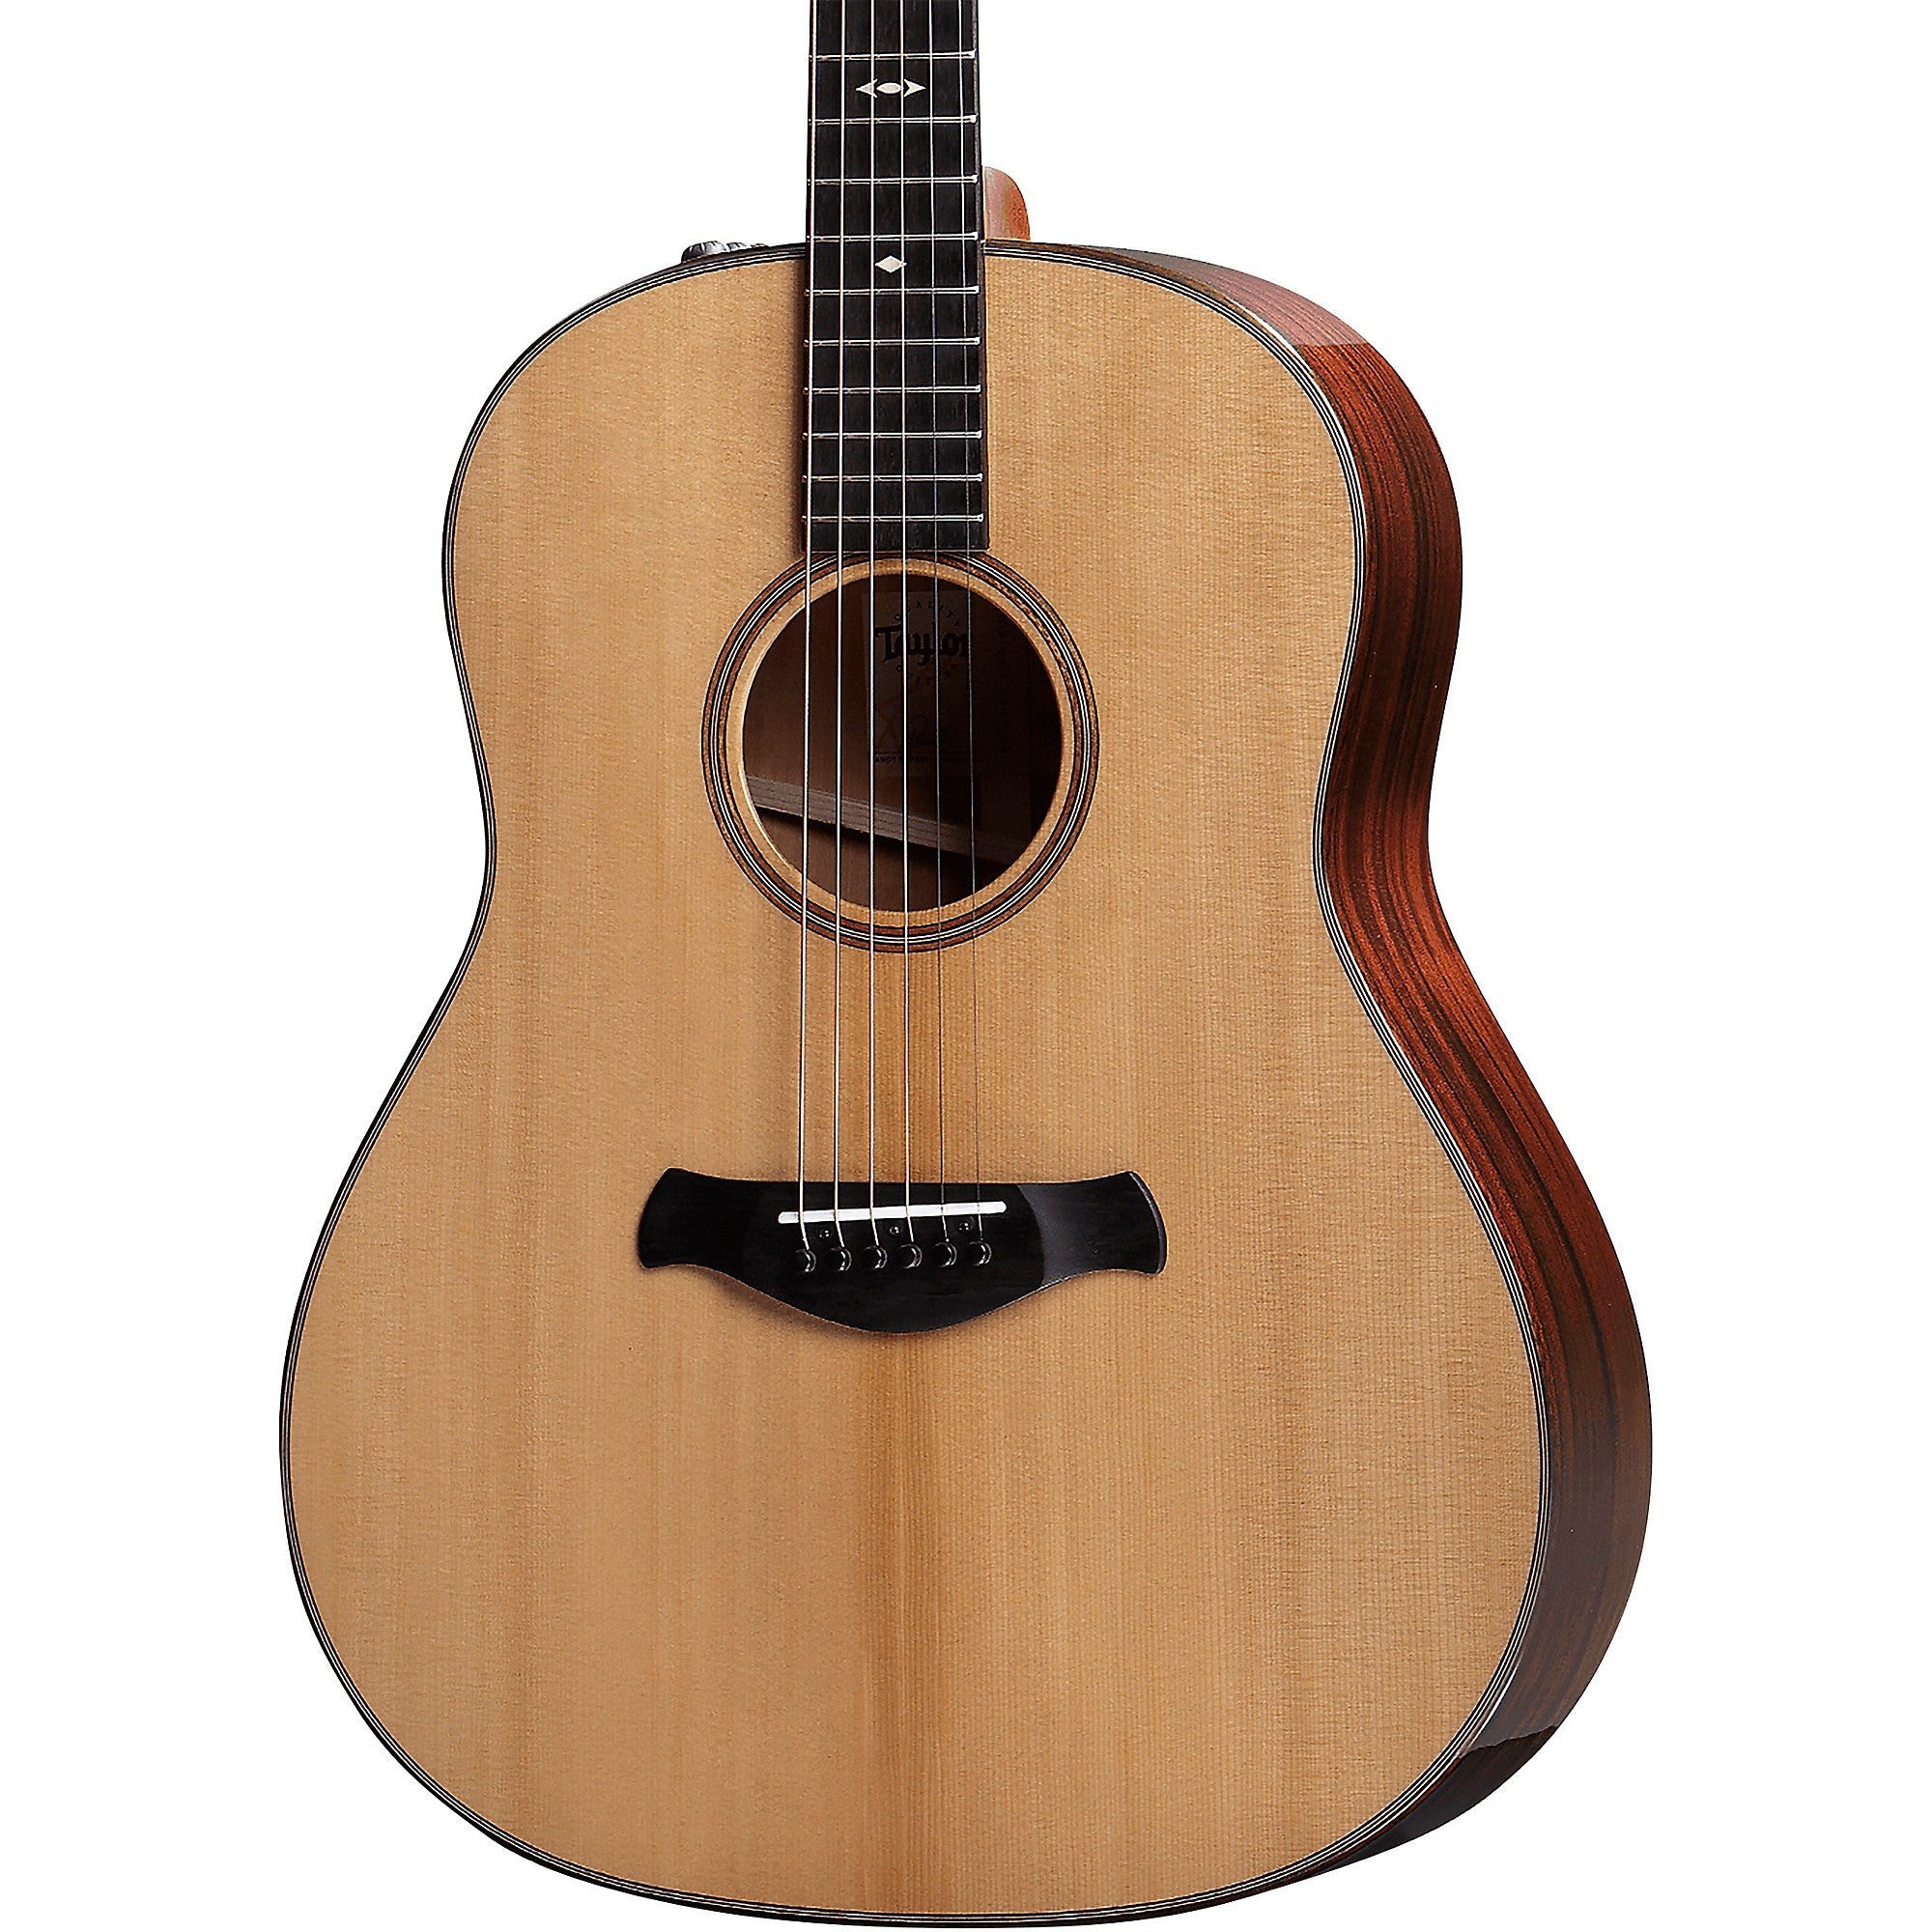 Taylor Builder's Edition 517e V-Class Grand Pacific Acoustic Guitar w/Case, Natural